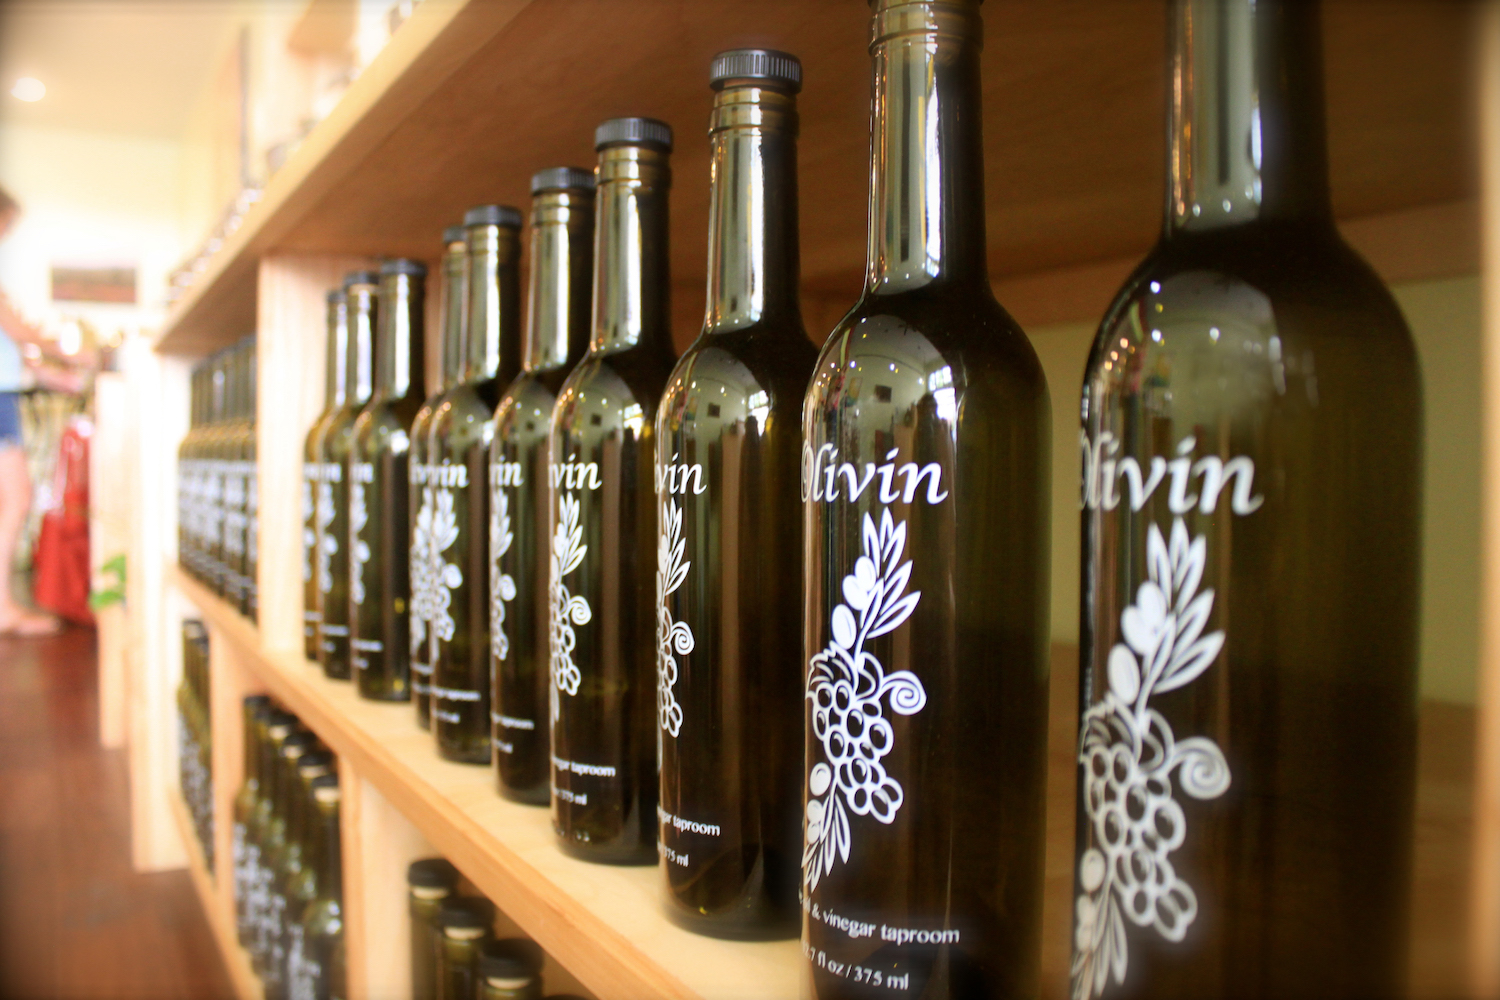 Olivin is an olive oil and balsamic vinegar taproom in Boise, Idaho.